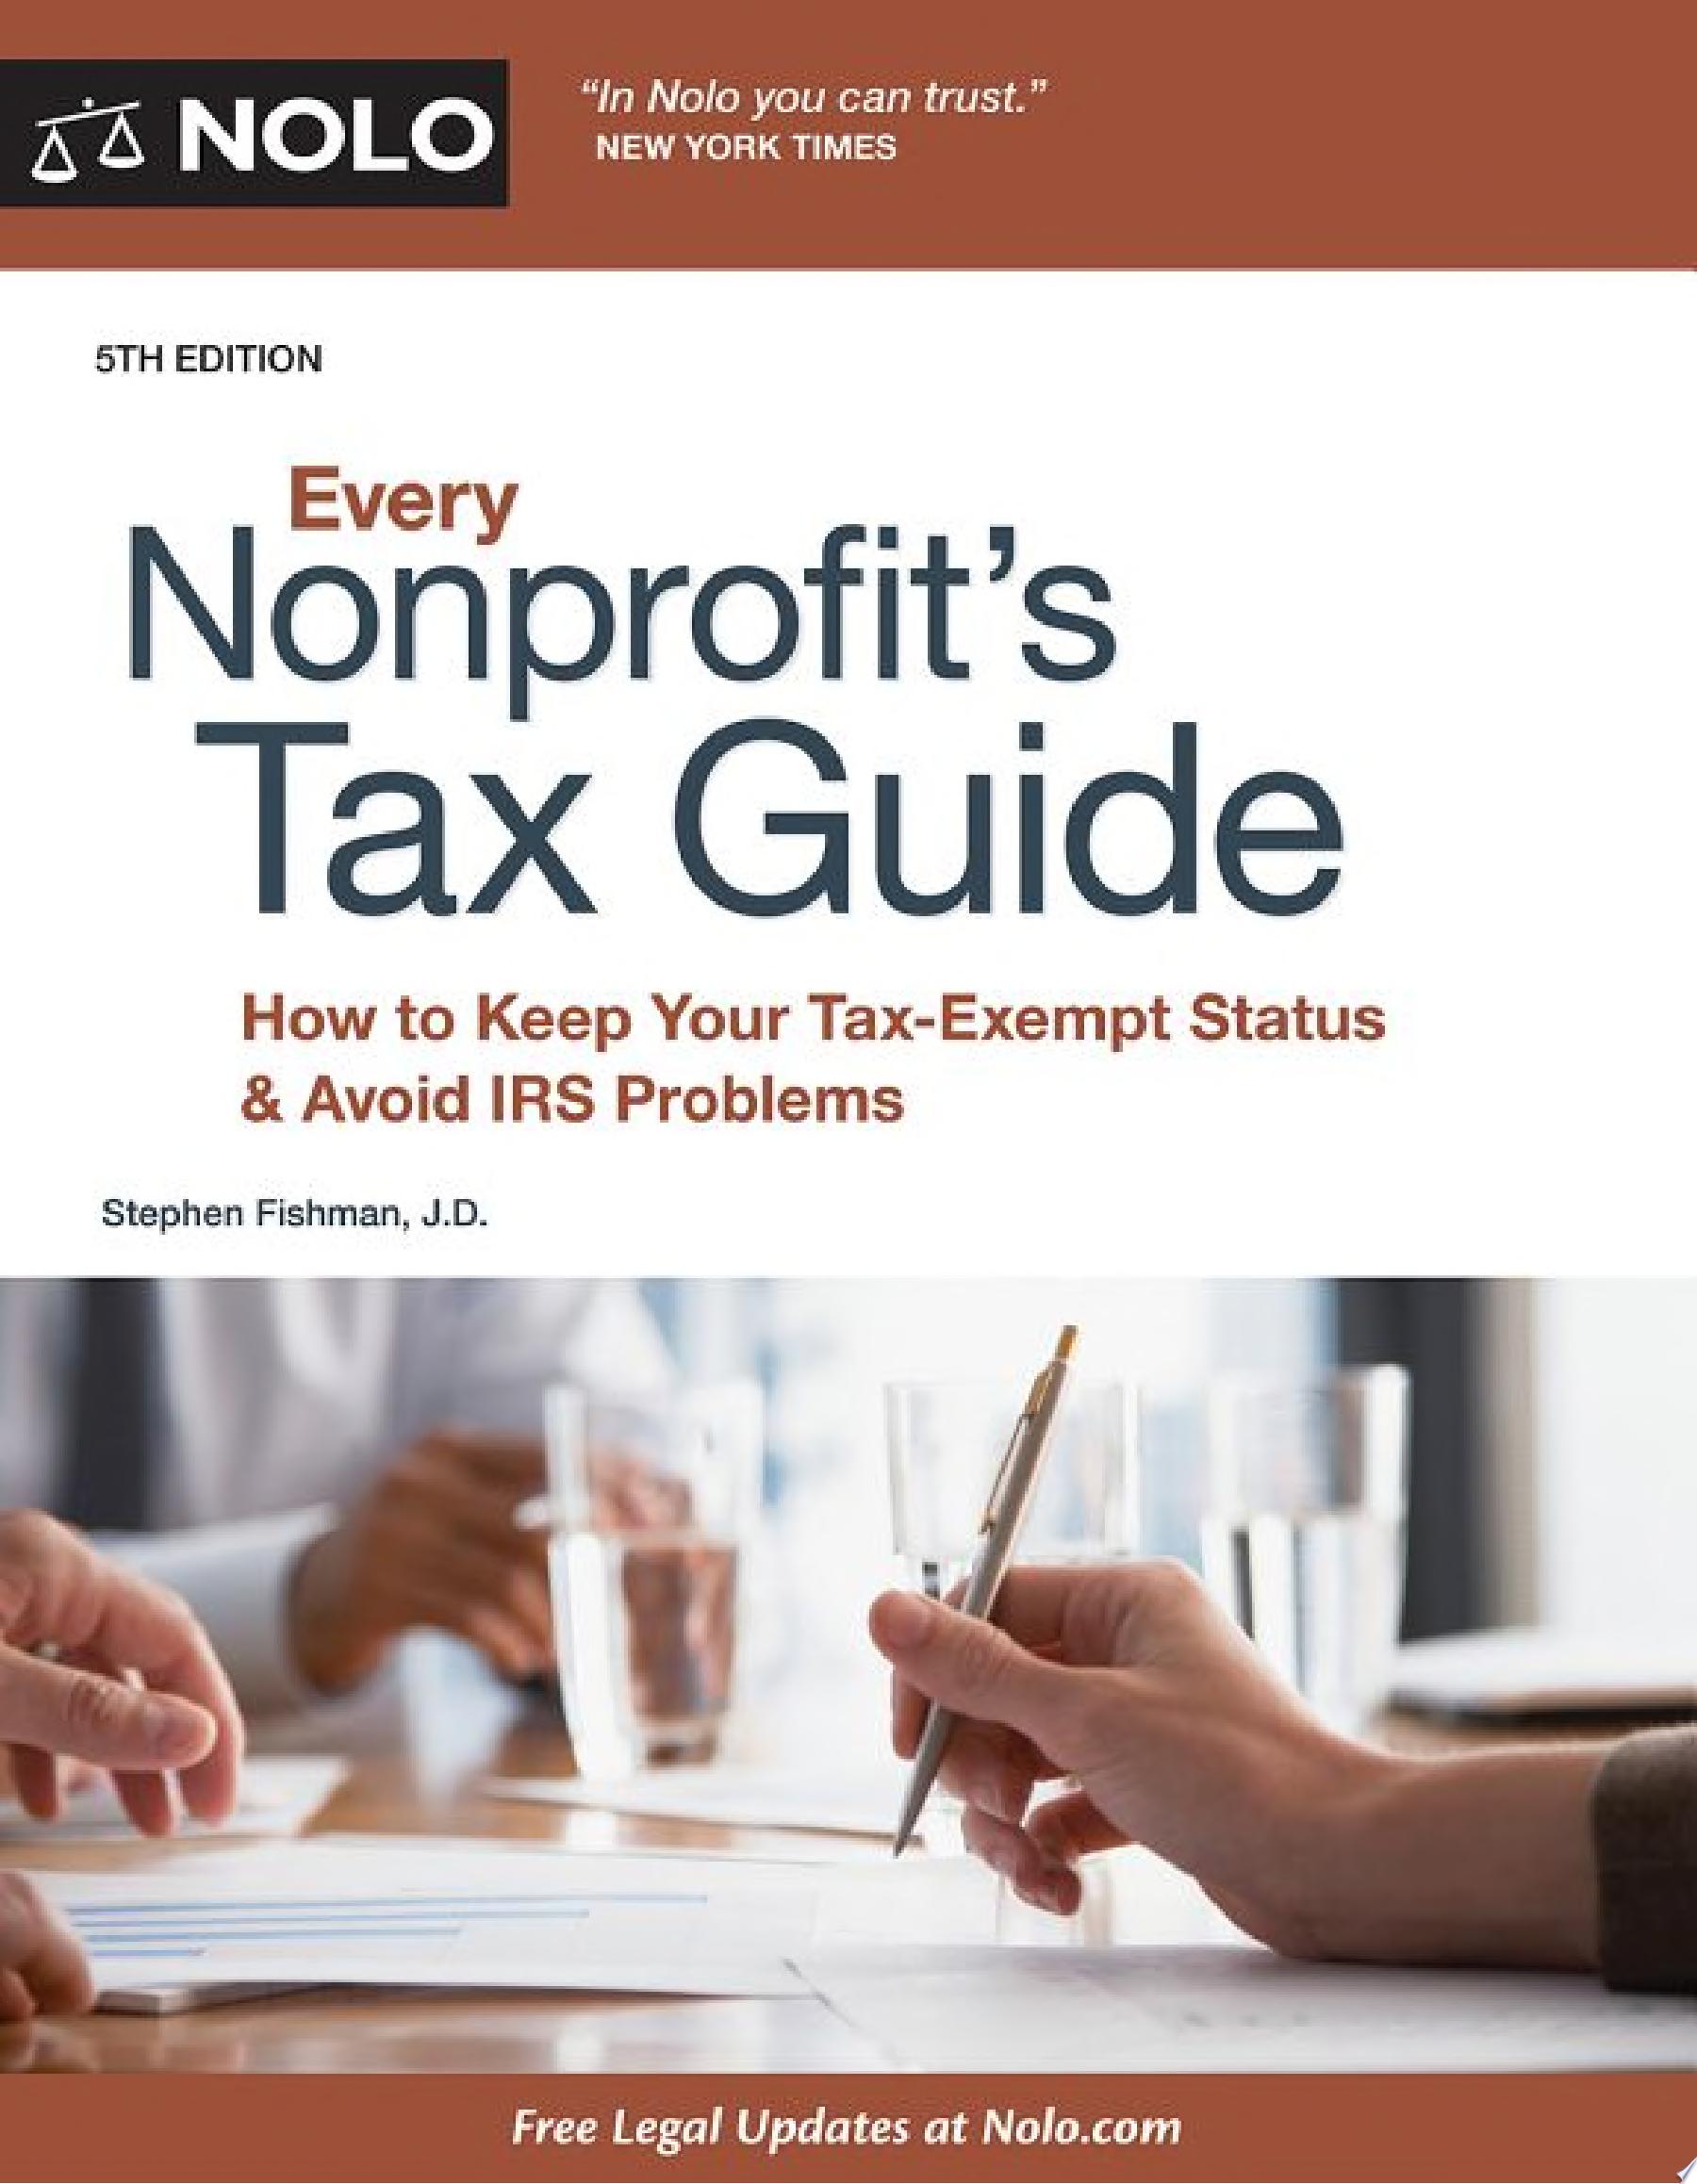 Image for "Every Nonprofit's Tax Guide"